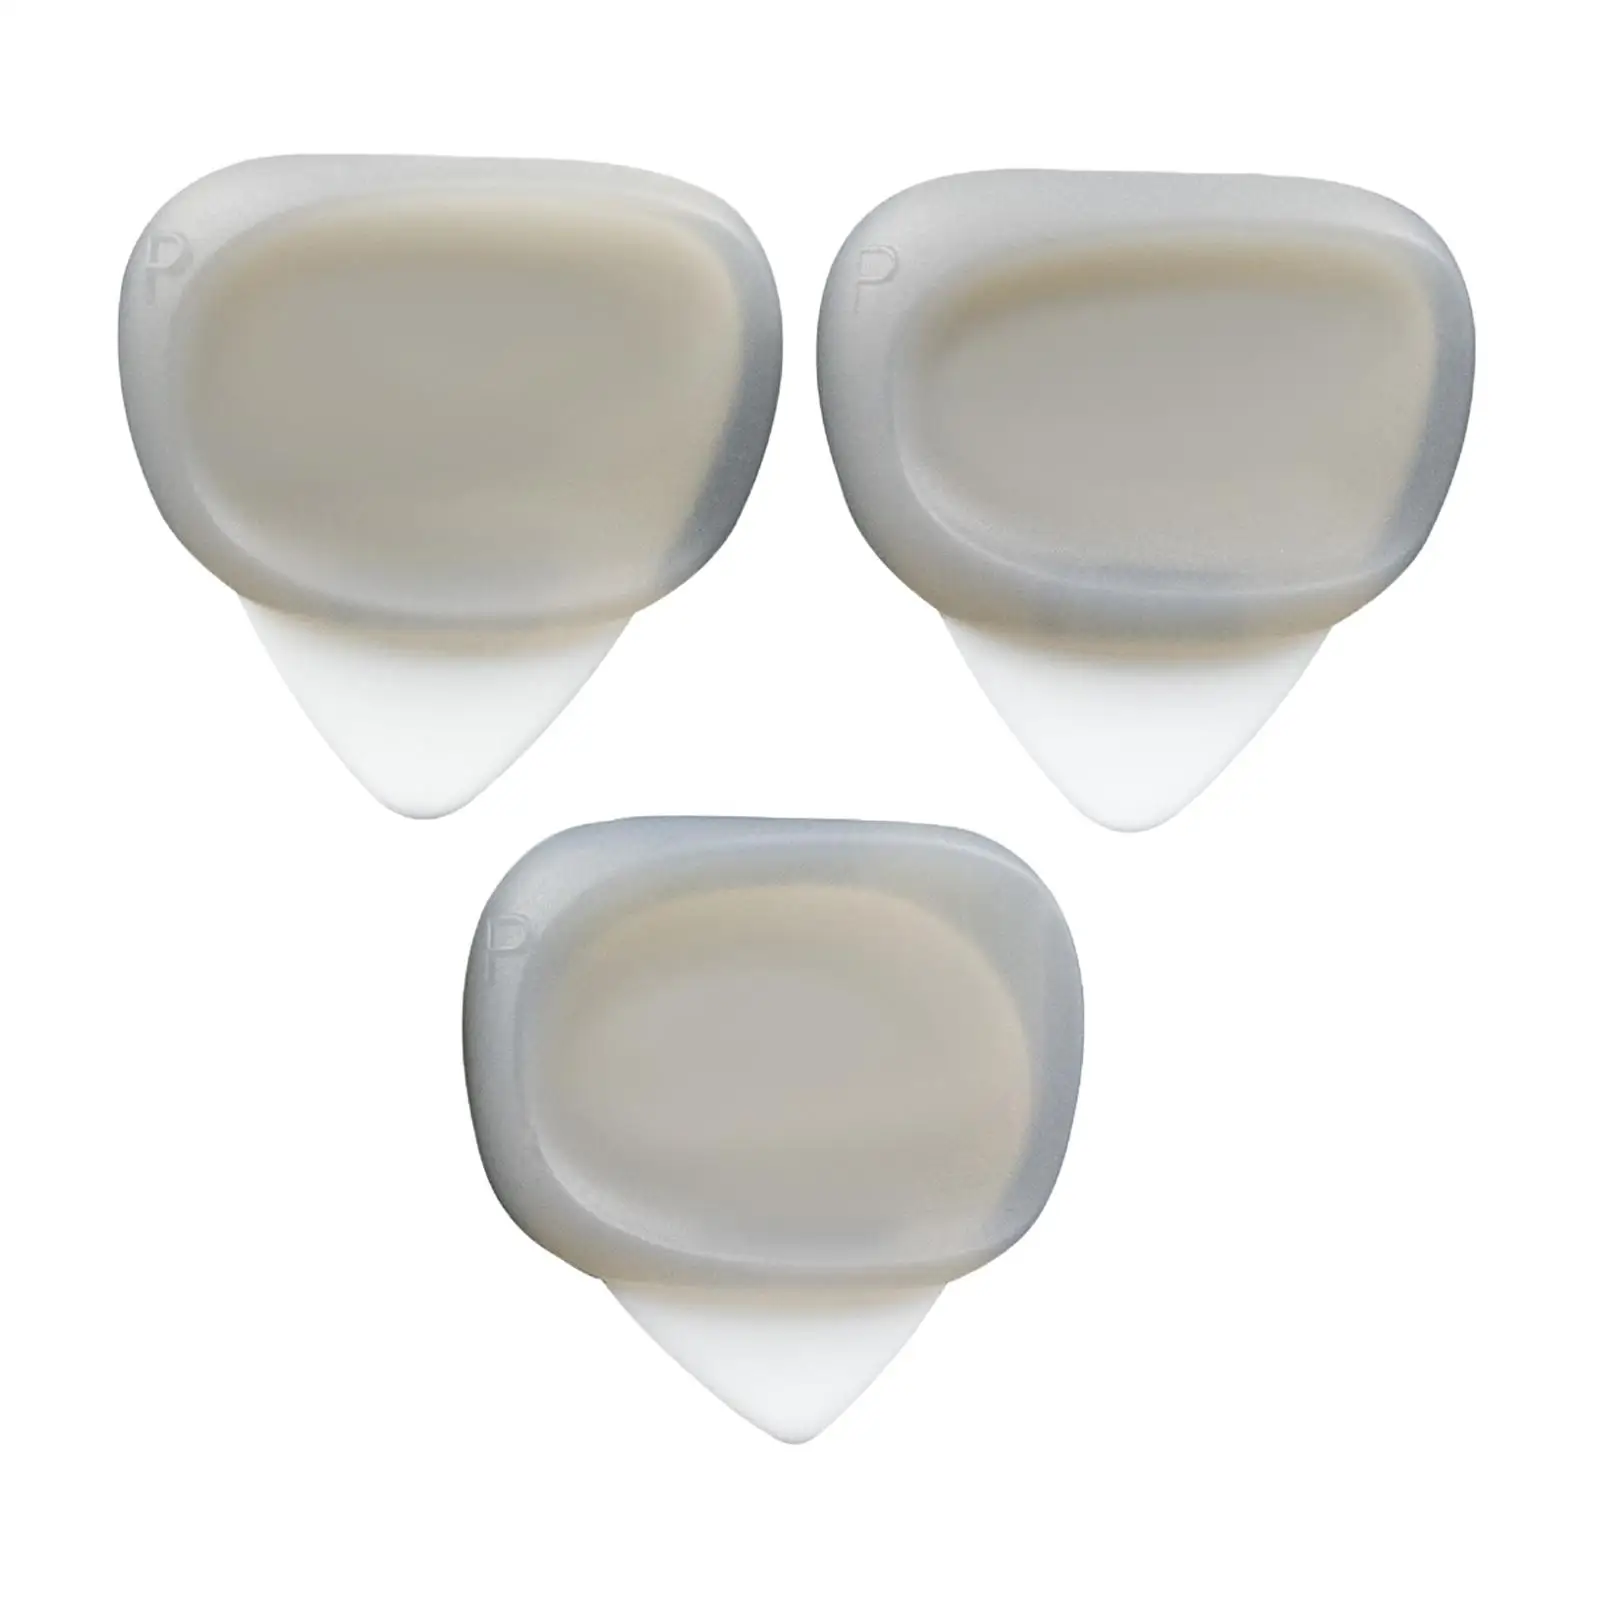 3 Pieces Classic Guitar Pick Set Guitar Plectrums for Beginners Picks Sized